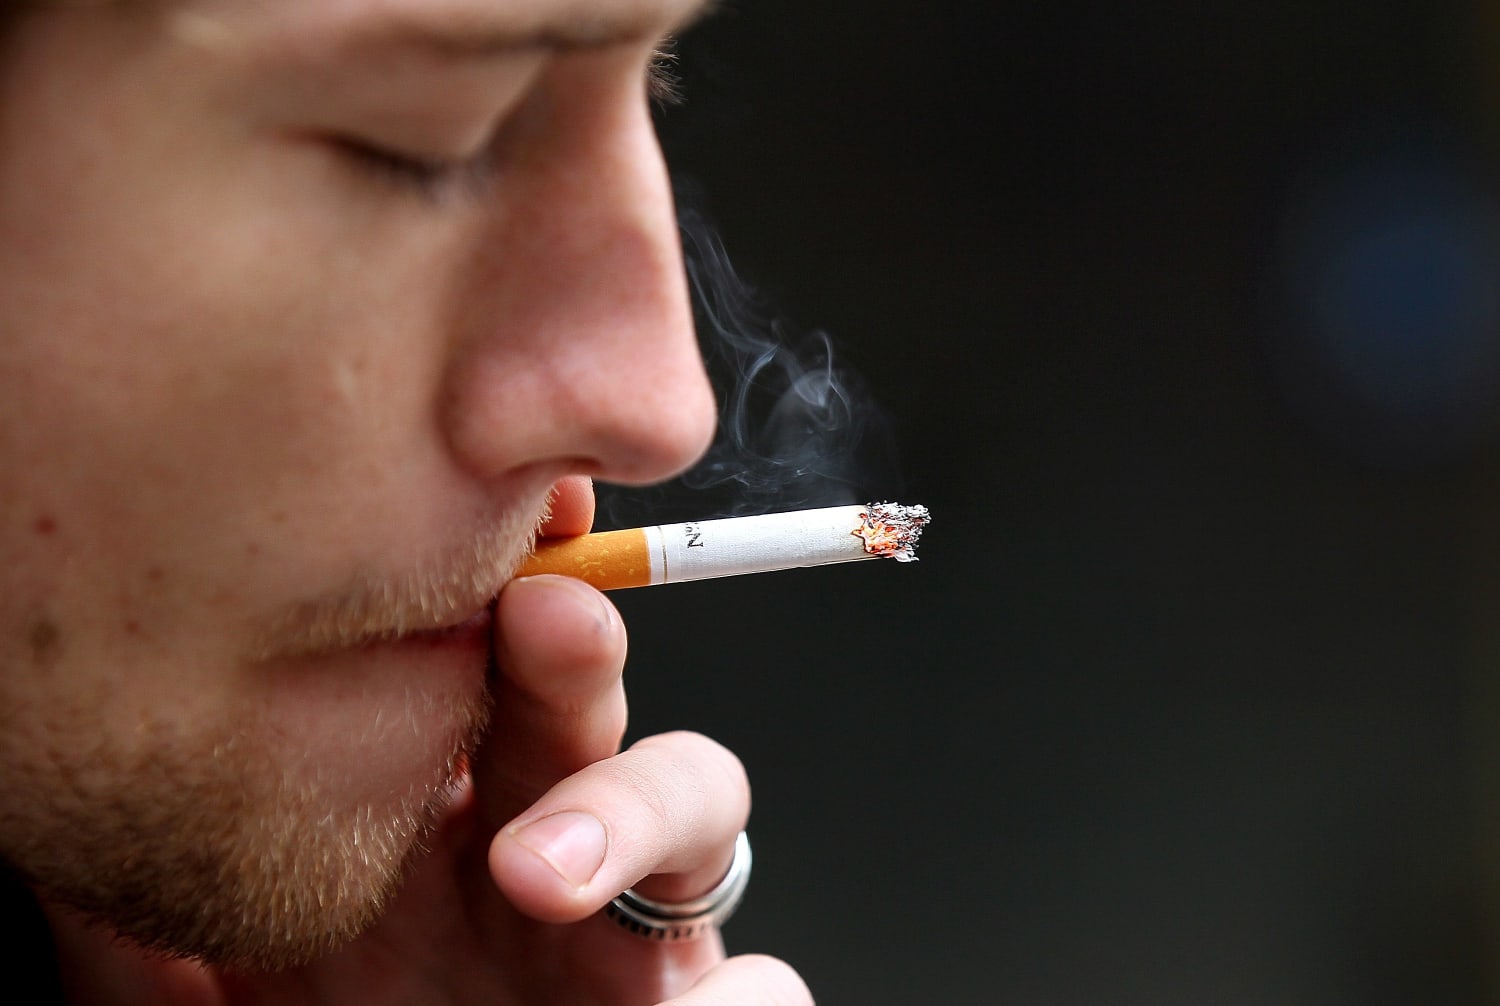 Smokers Less Likely to Hired and Earn Less: Study